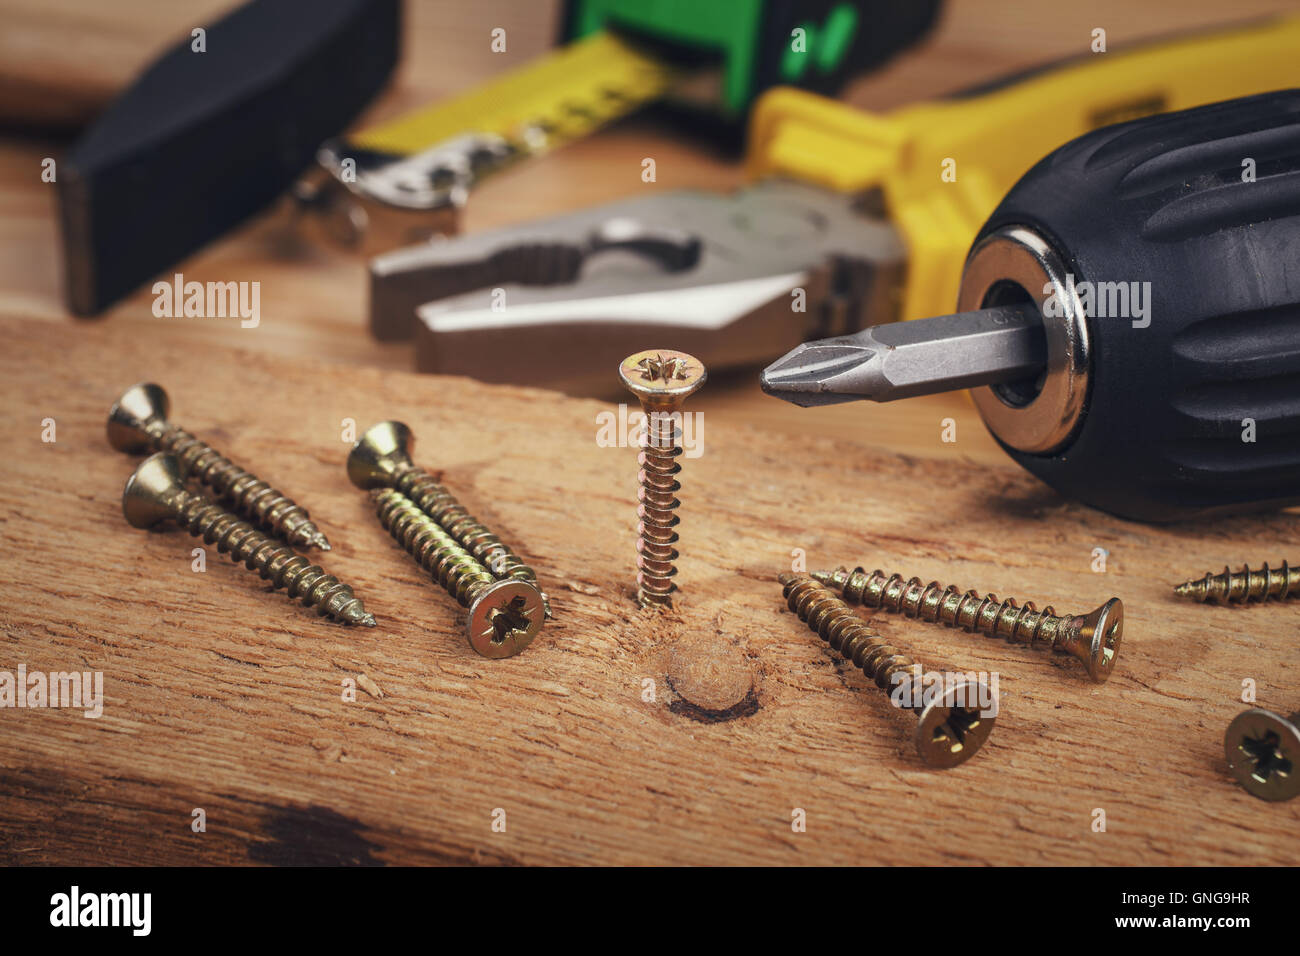 Wood screws and carpentry tools Stock Photo